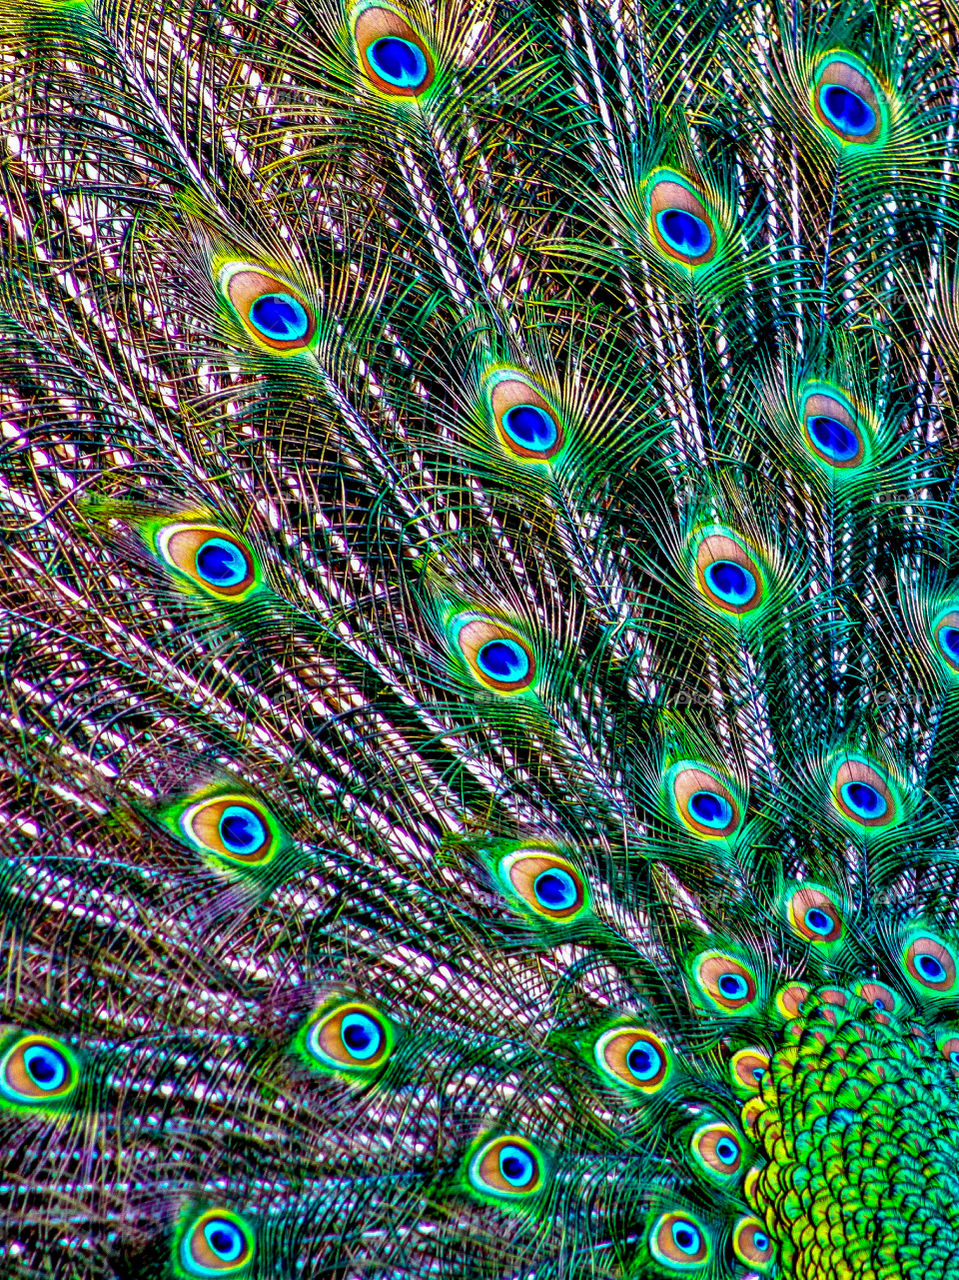 Feathers of peacock